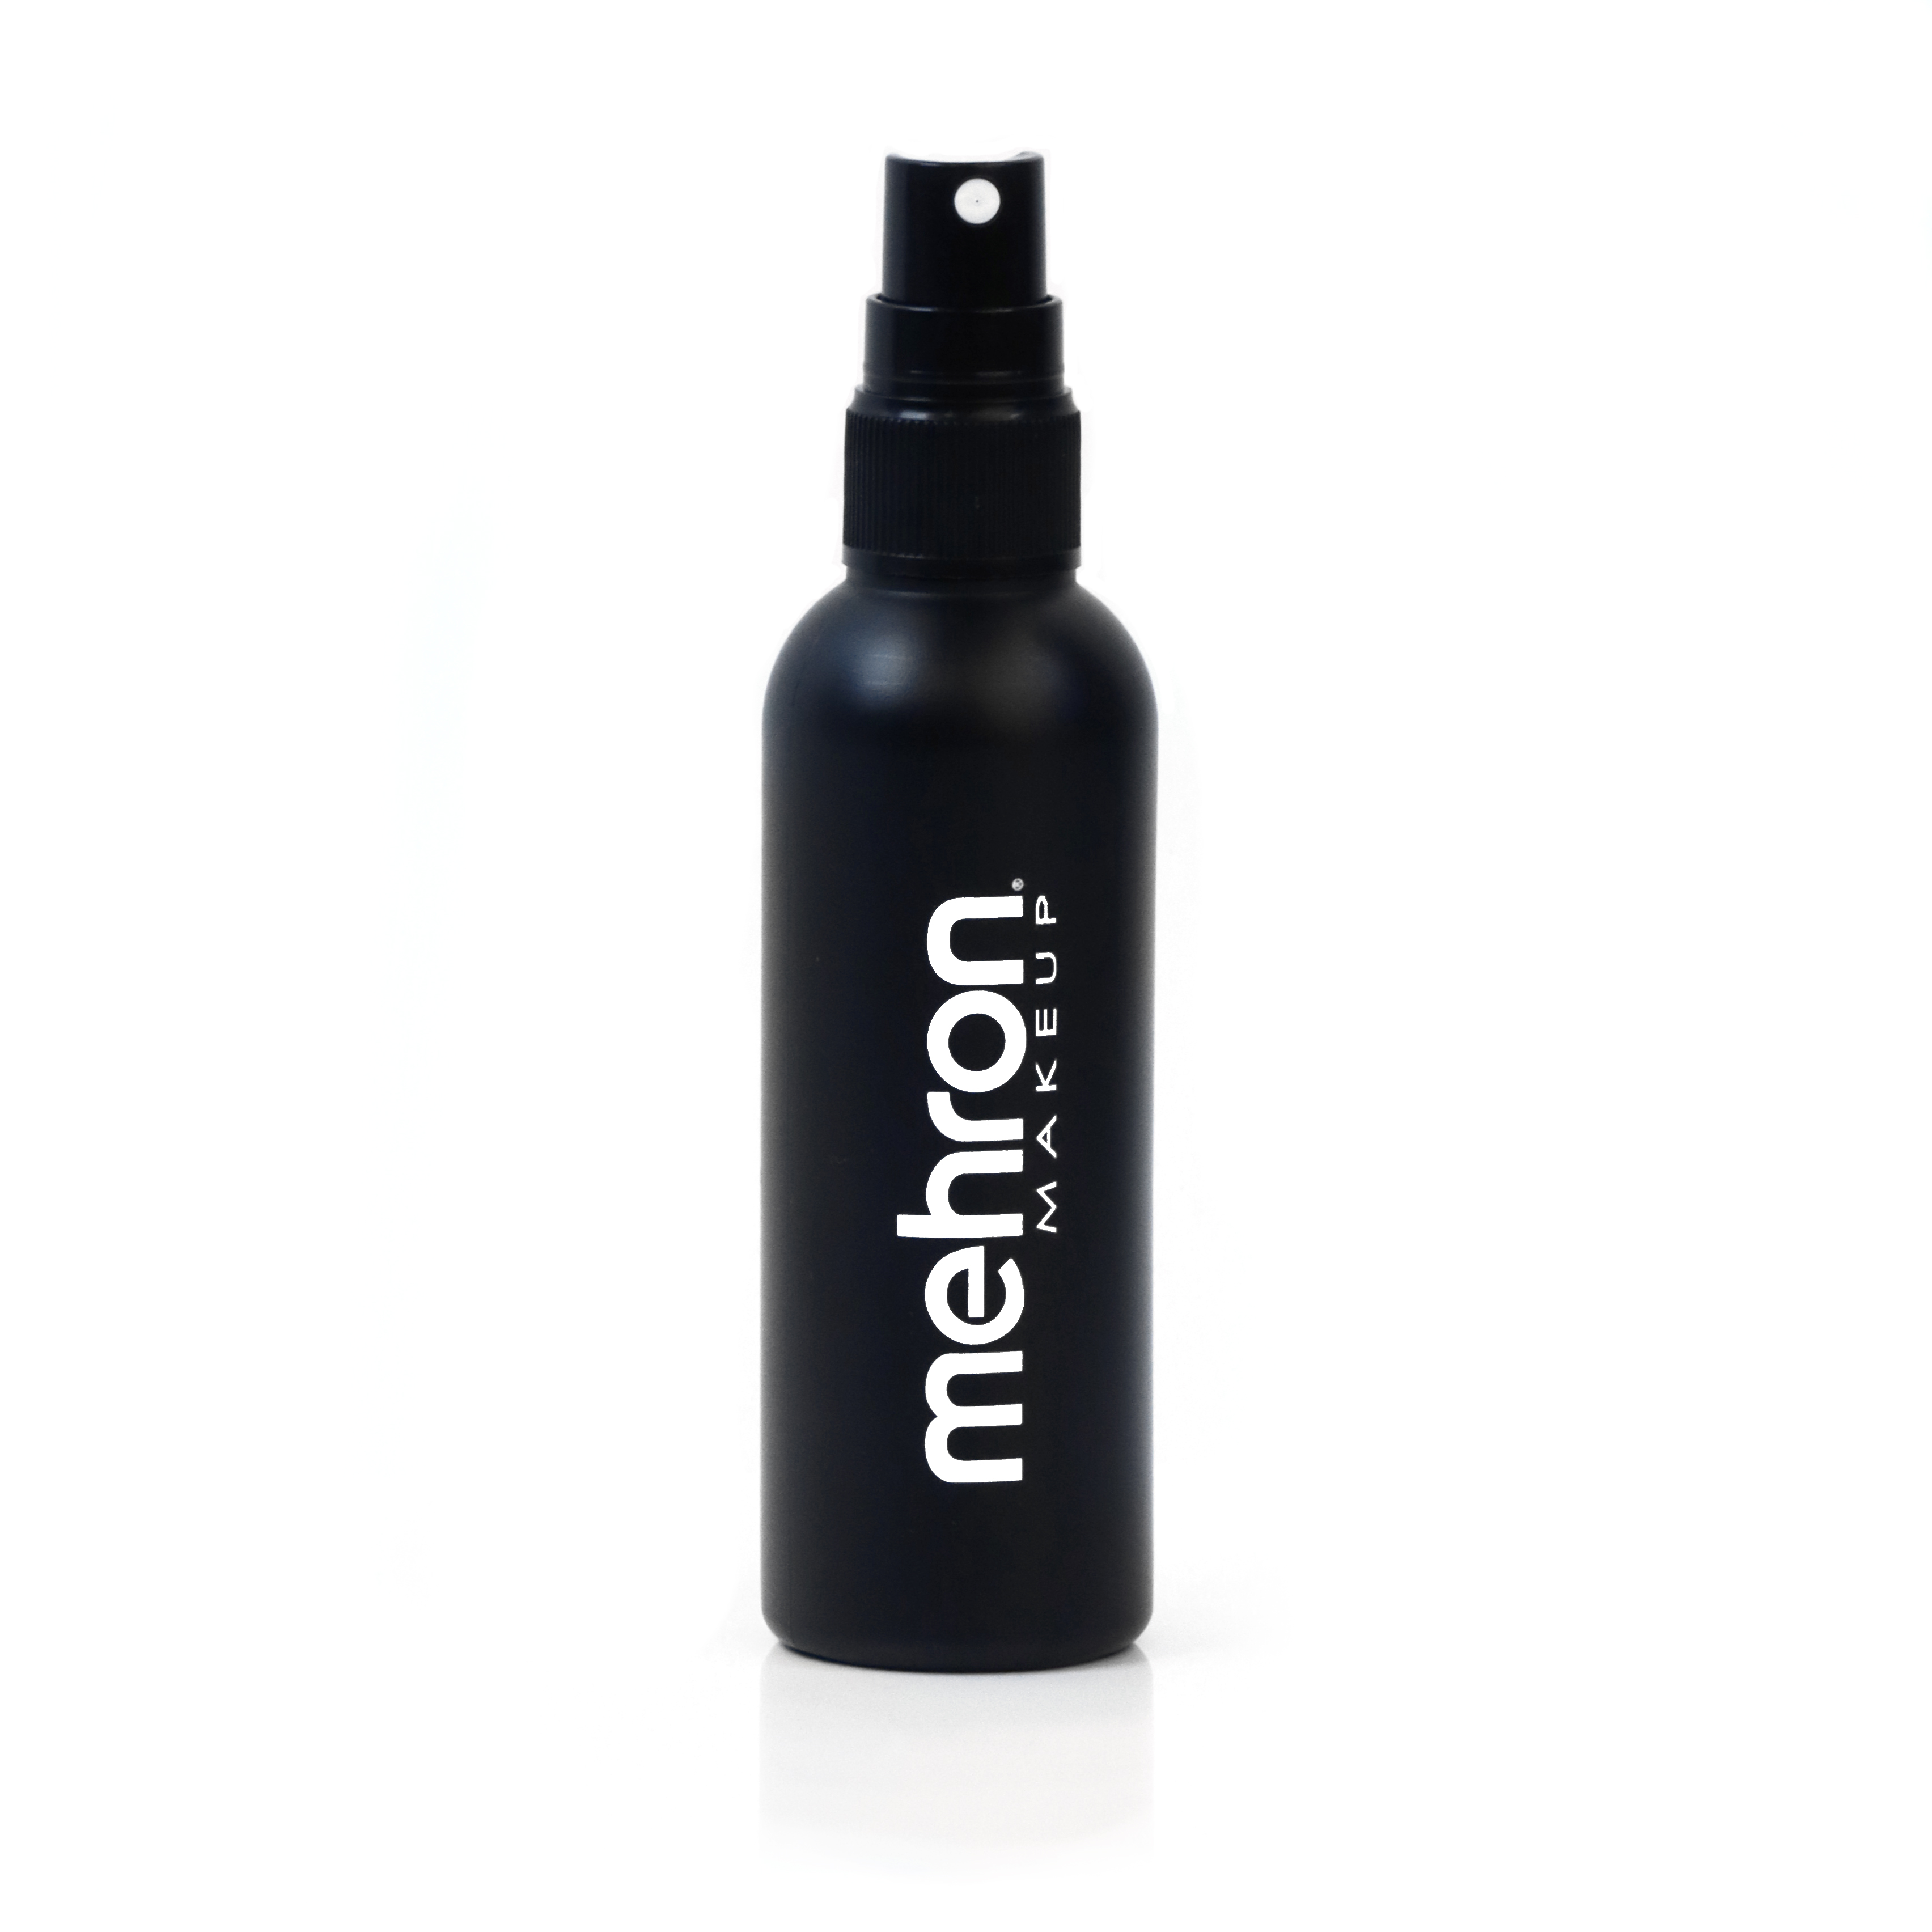 MEHRON BARRIER SPRAY MAKEUP FIXING SETTING SPRAY SMUDGE-PROOF REFILL BOTTLE  9OZ